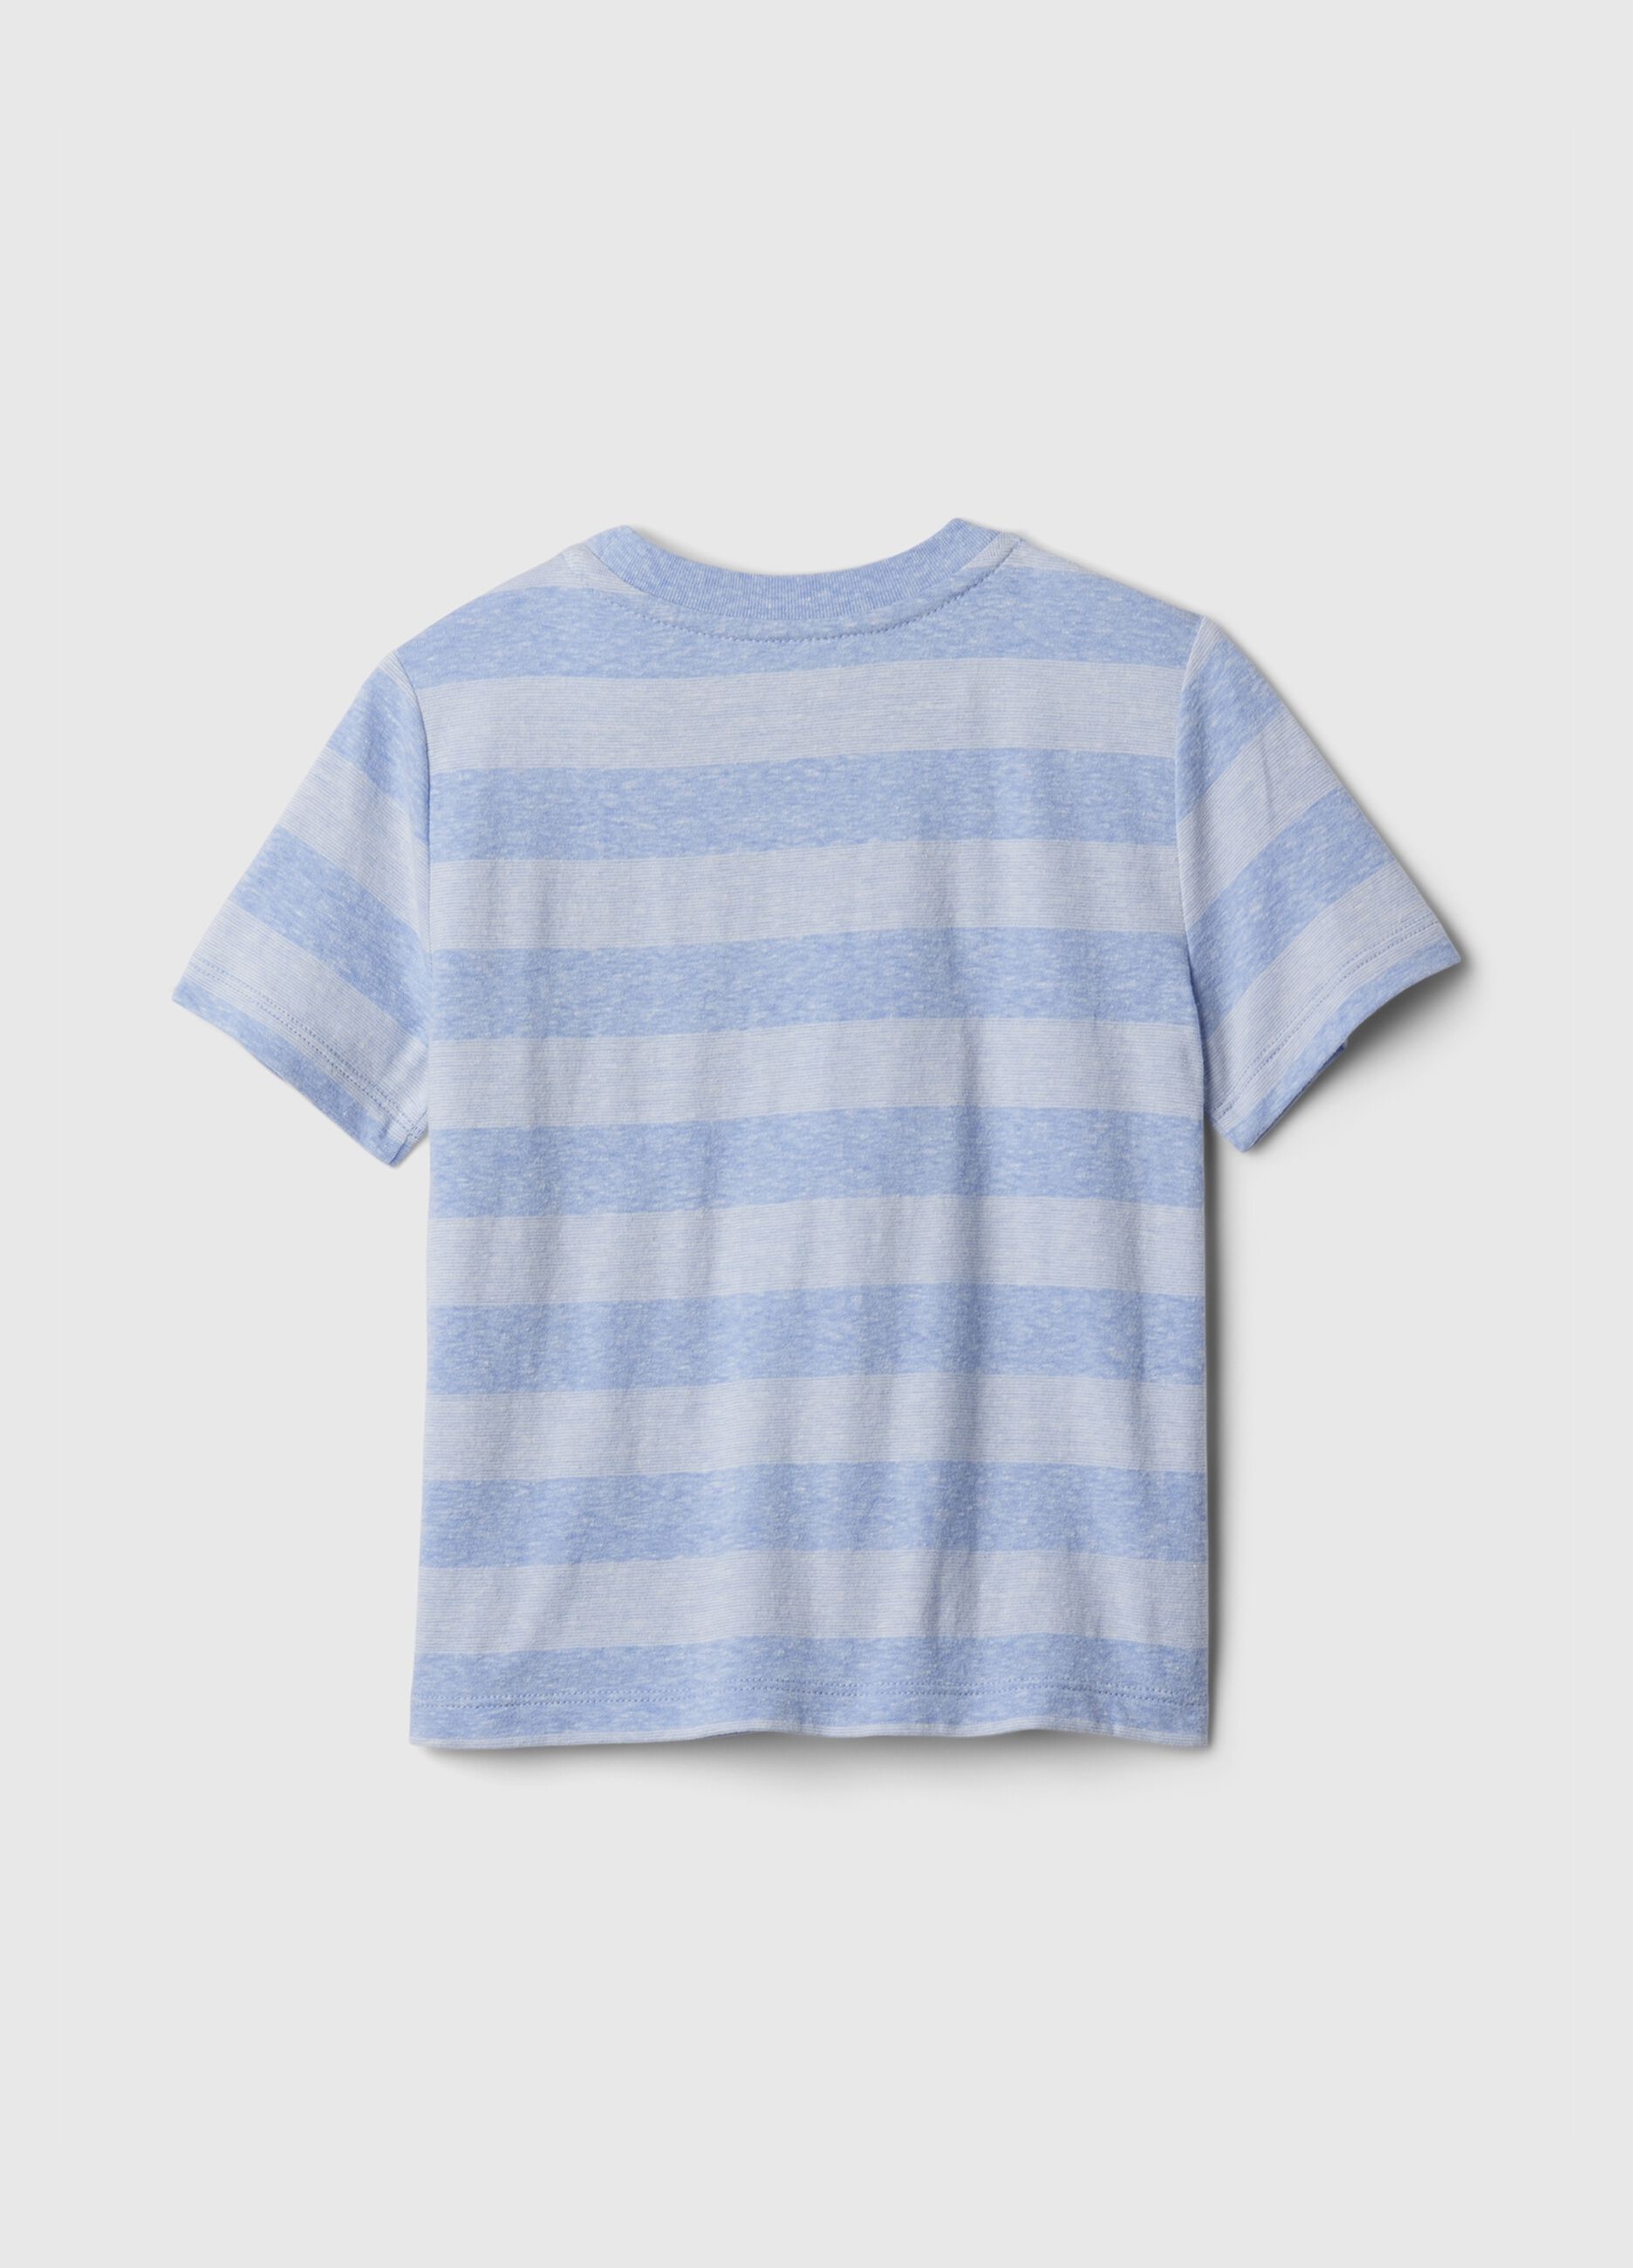 Striped T-shirt with pocket with Brennan Bear